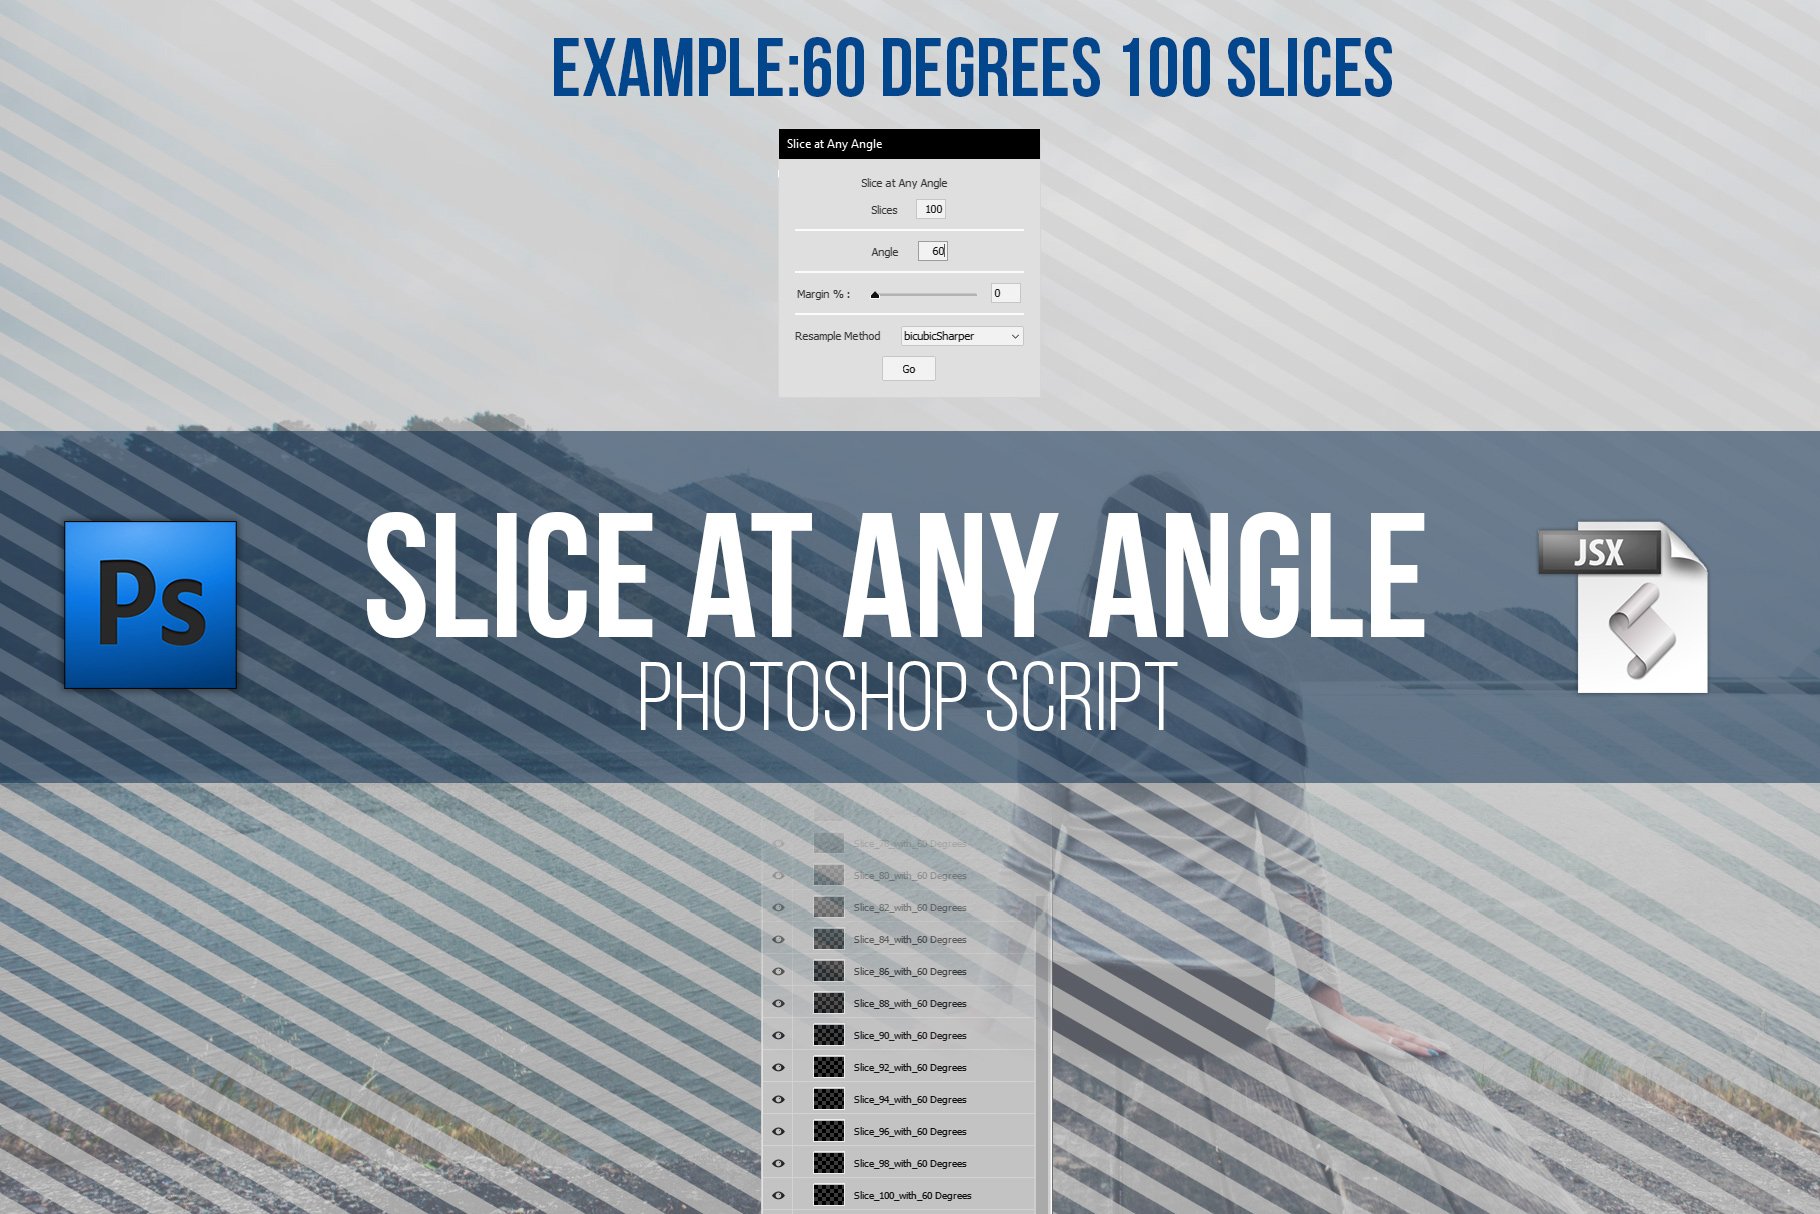 Slice at Any Angle PS Scriptpreview image.